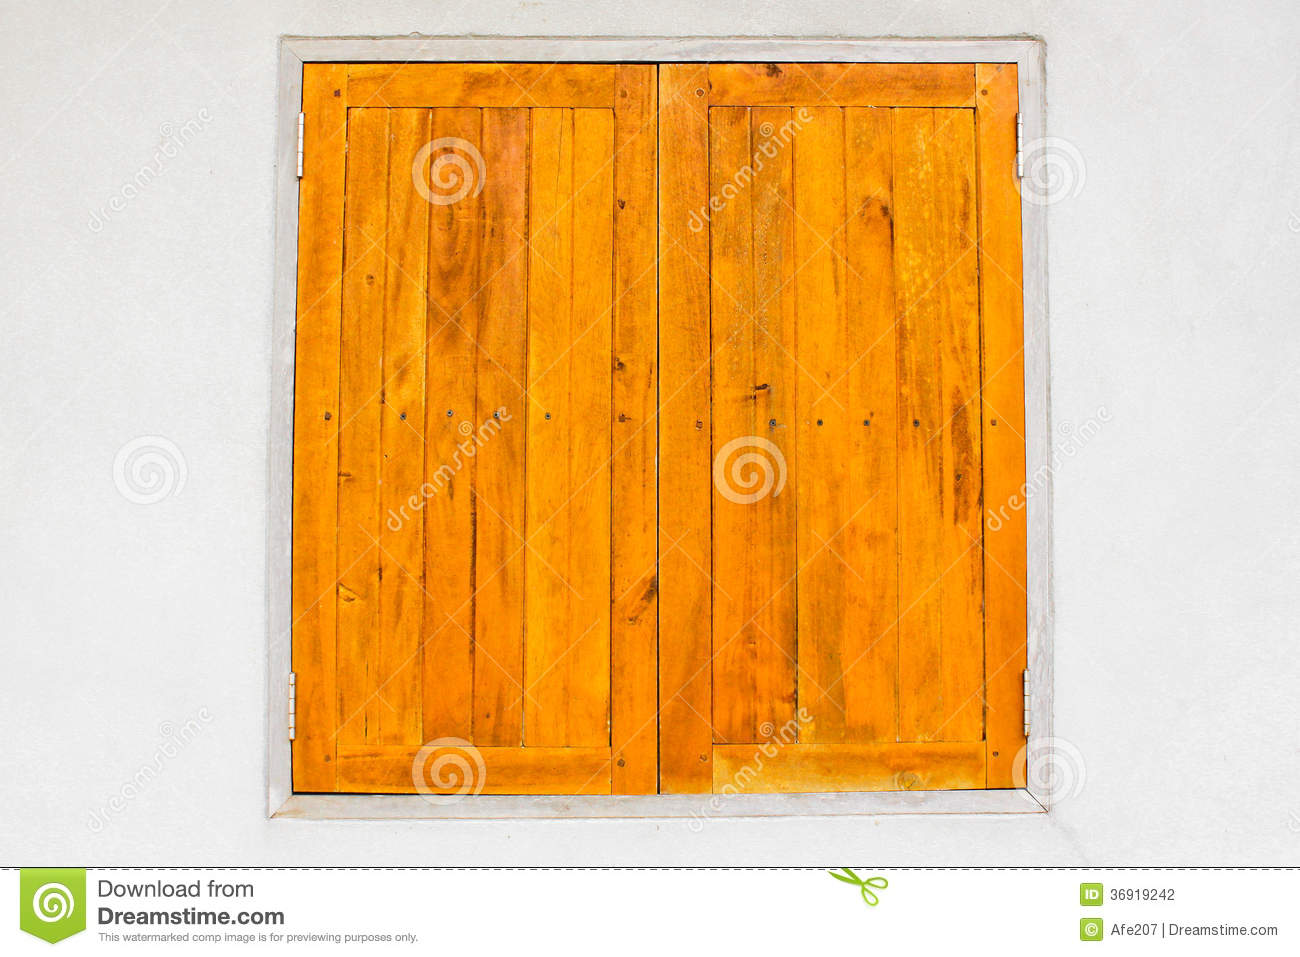 This Is Wood Window Surface Parquet On Wall Texture Background